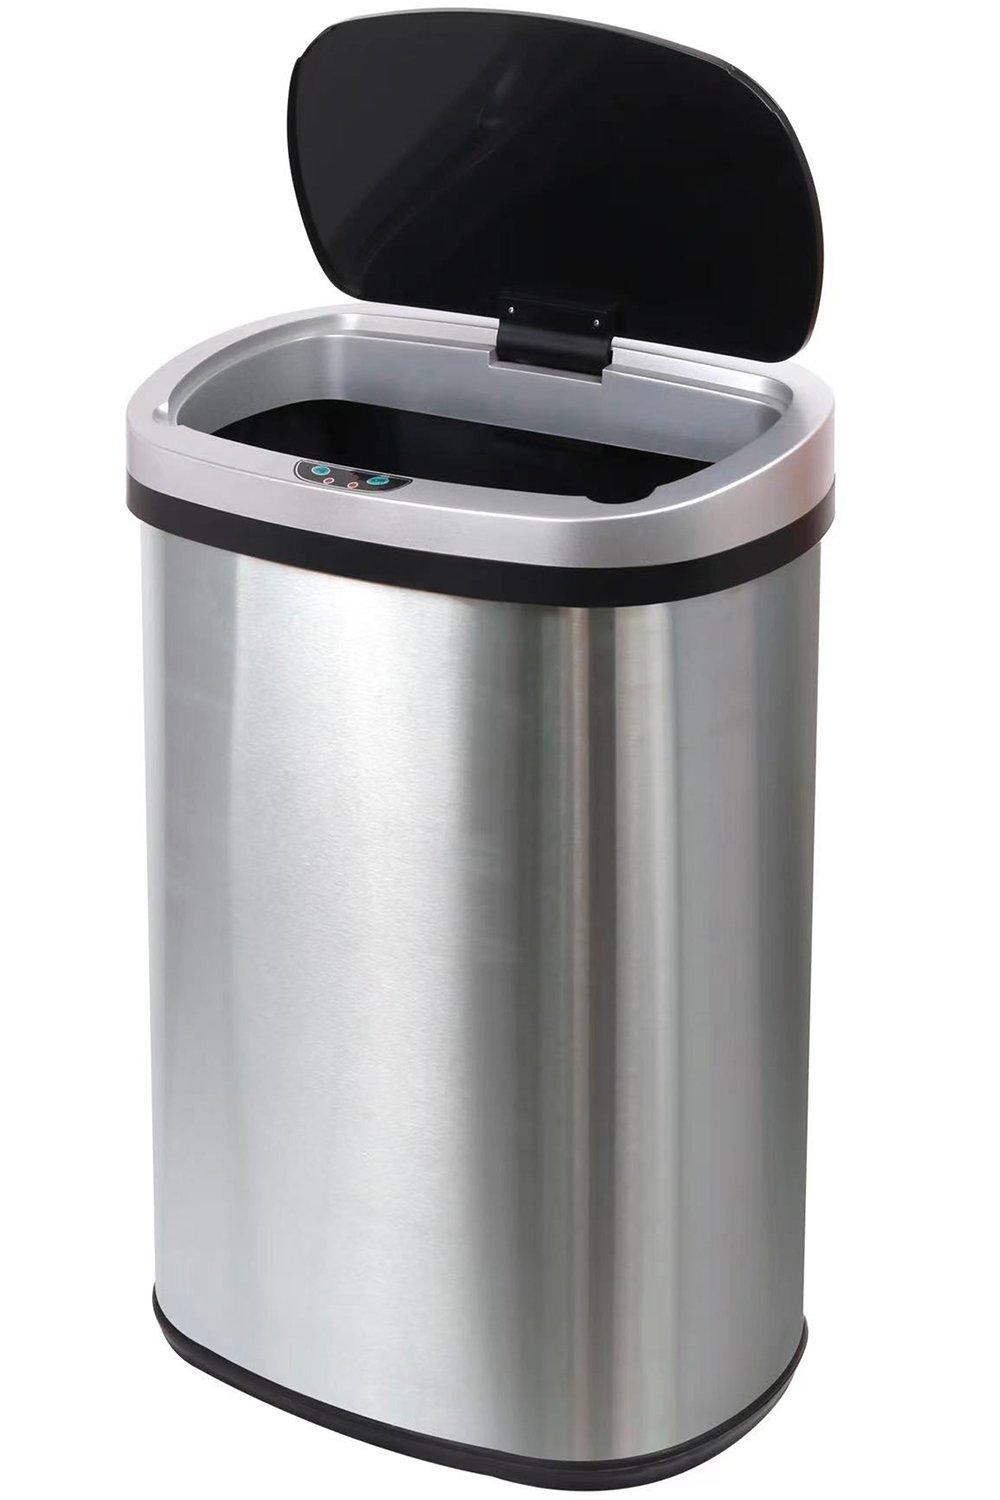 Automatic Sensor Touchless Bin Brushed Stainless Steel 50L